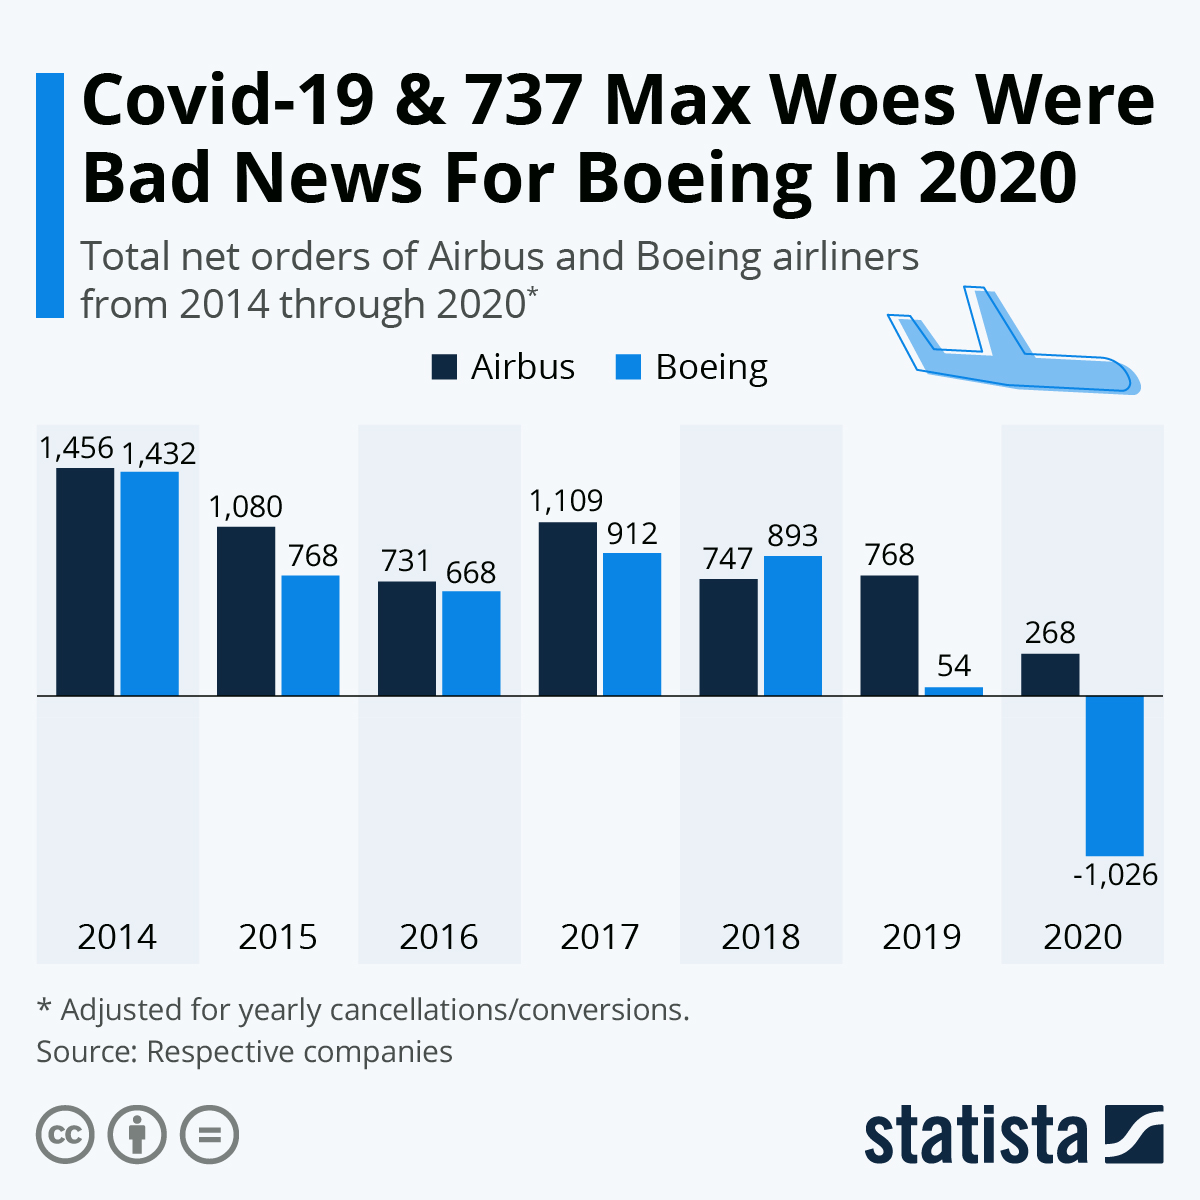 COVID-19 and 737 Max Woes Were Bad News For Boeing In 2020